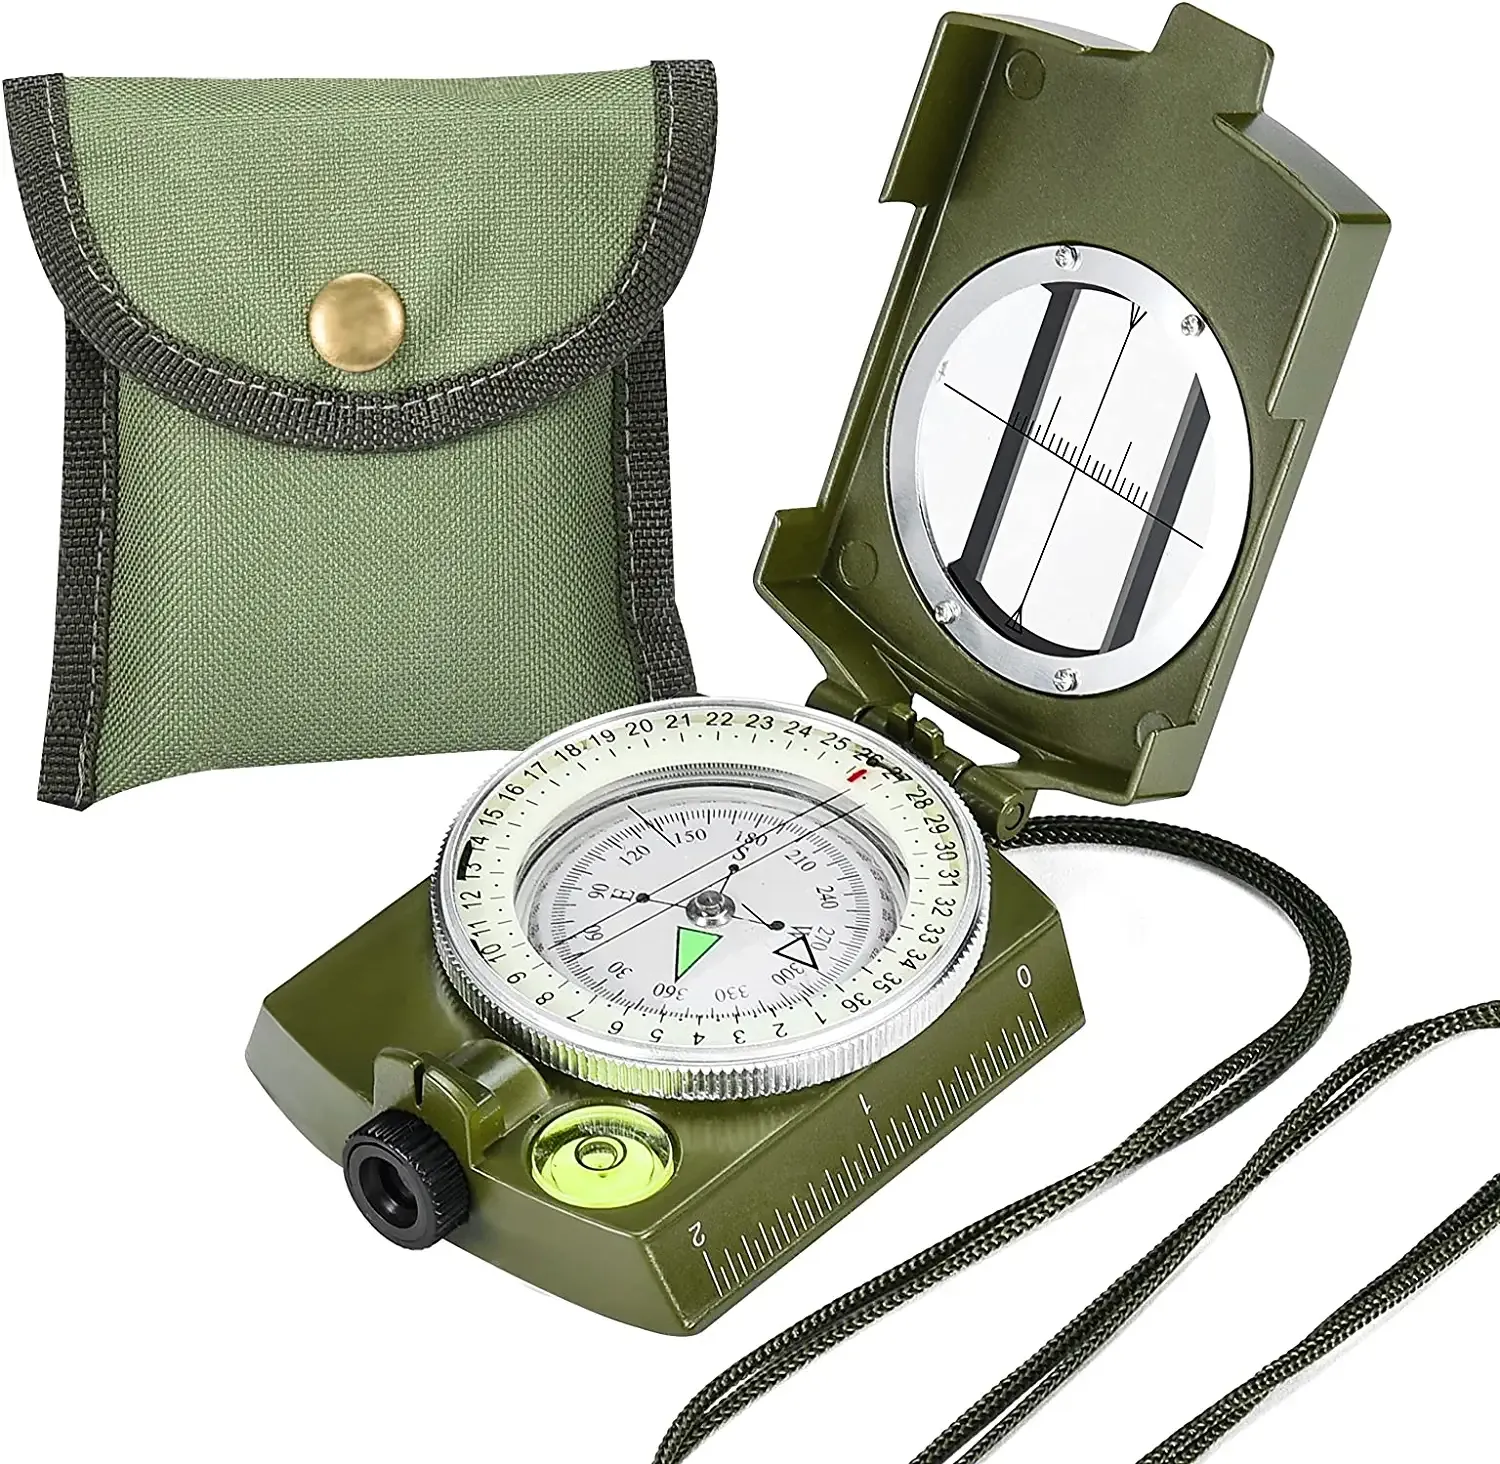 Military Lensatic Sighting Compass with Carrying Bag for Hiking,Waterproof and Shakeproof